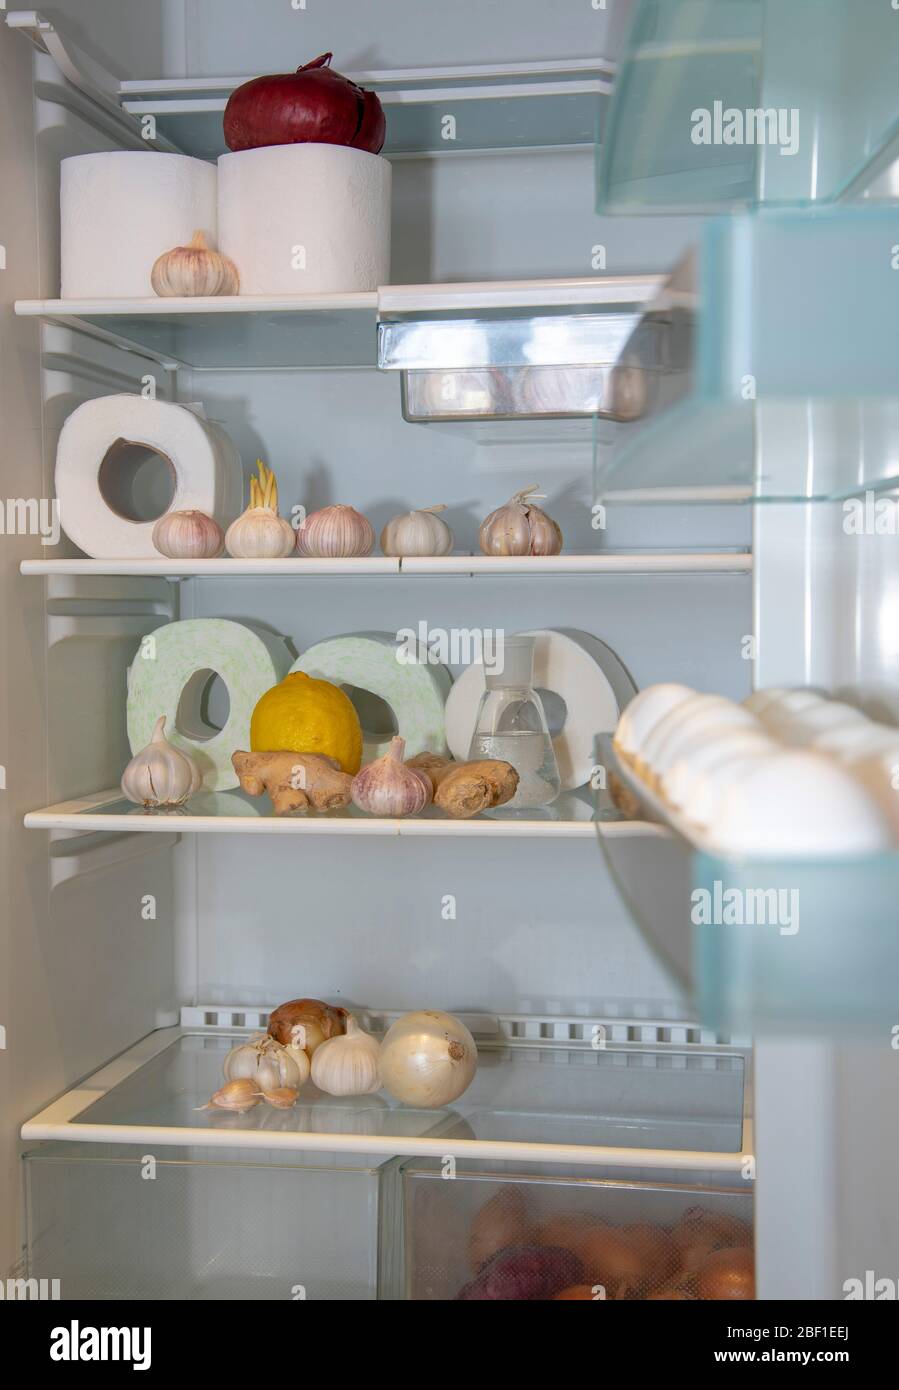 There are rolls of toilet paper, garlic , ginger, and eggs in the open refrigerator.  Stock Photo